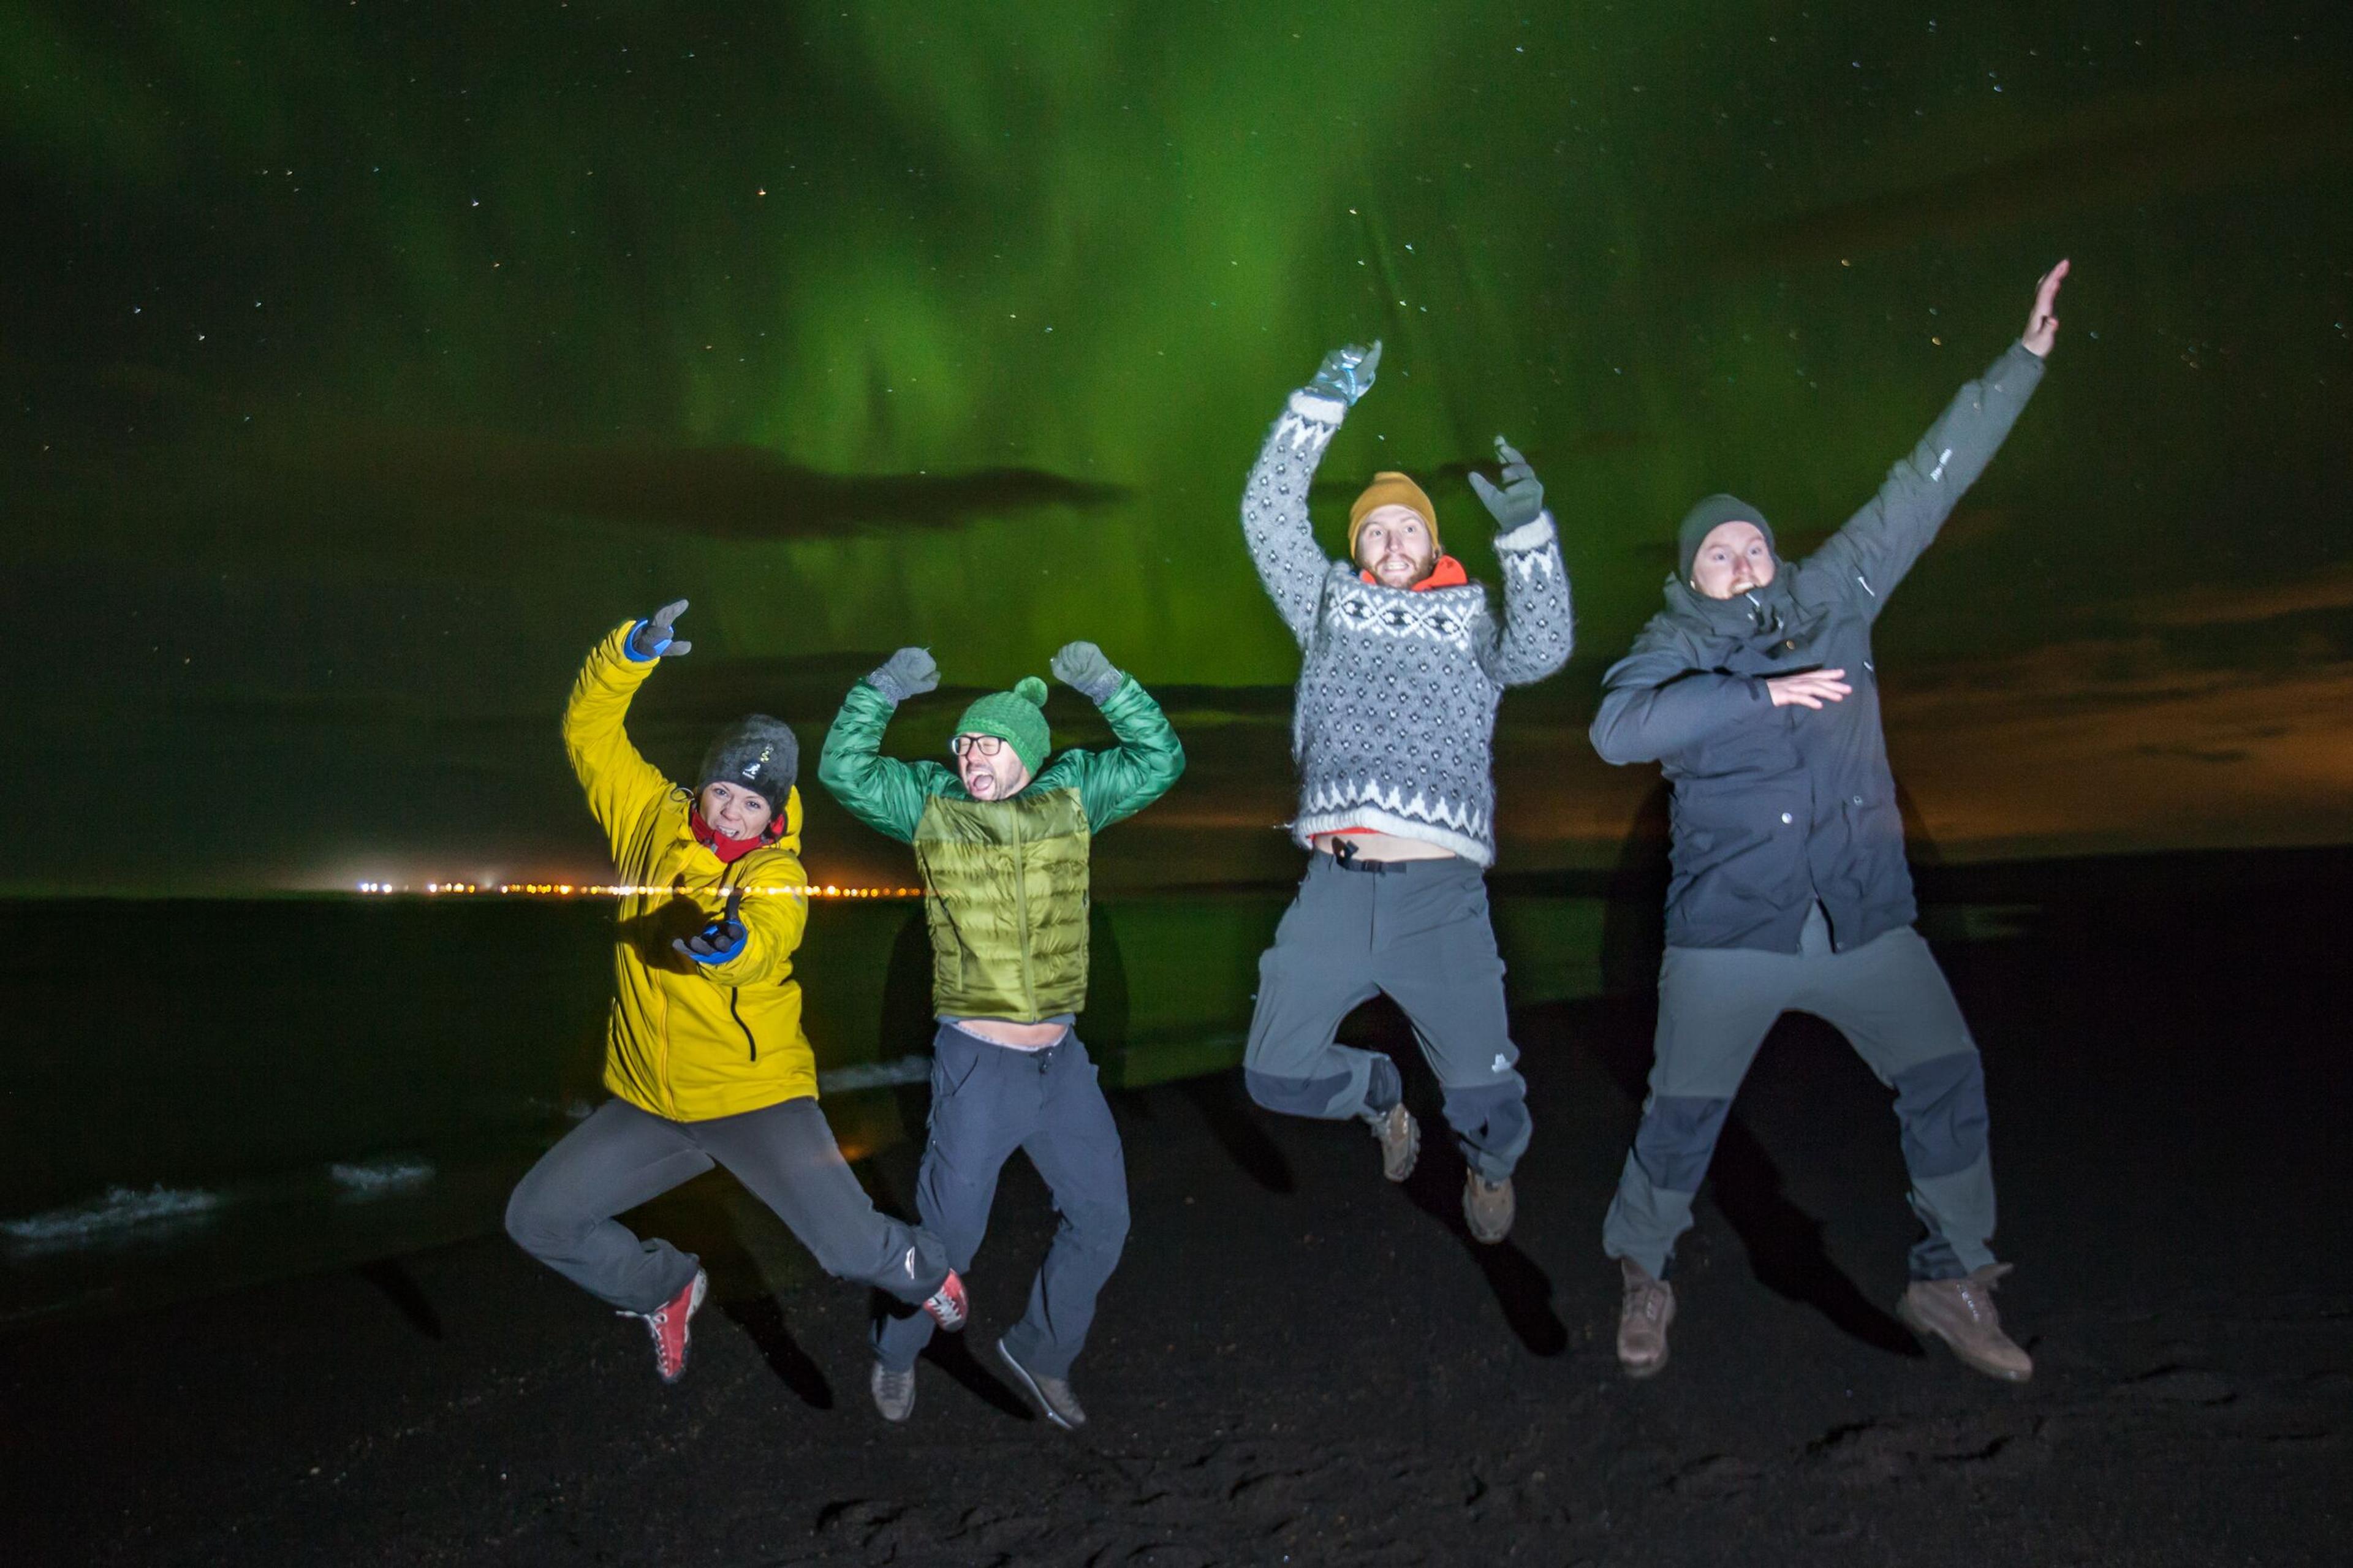 Joyful travelers leaping in the air, posing for a photo with the mesmerizing Northern Lights illuminating the night sky.